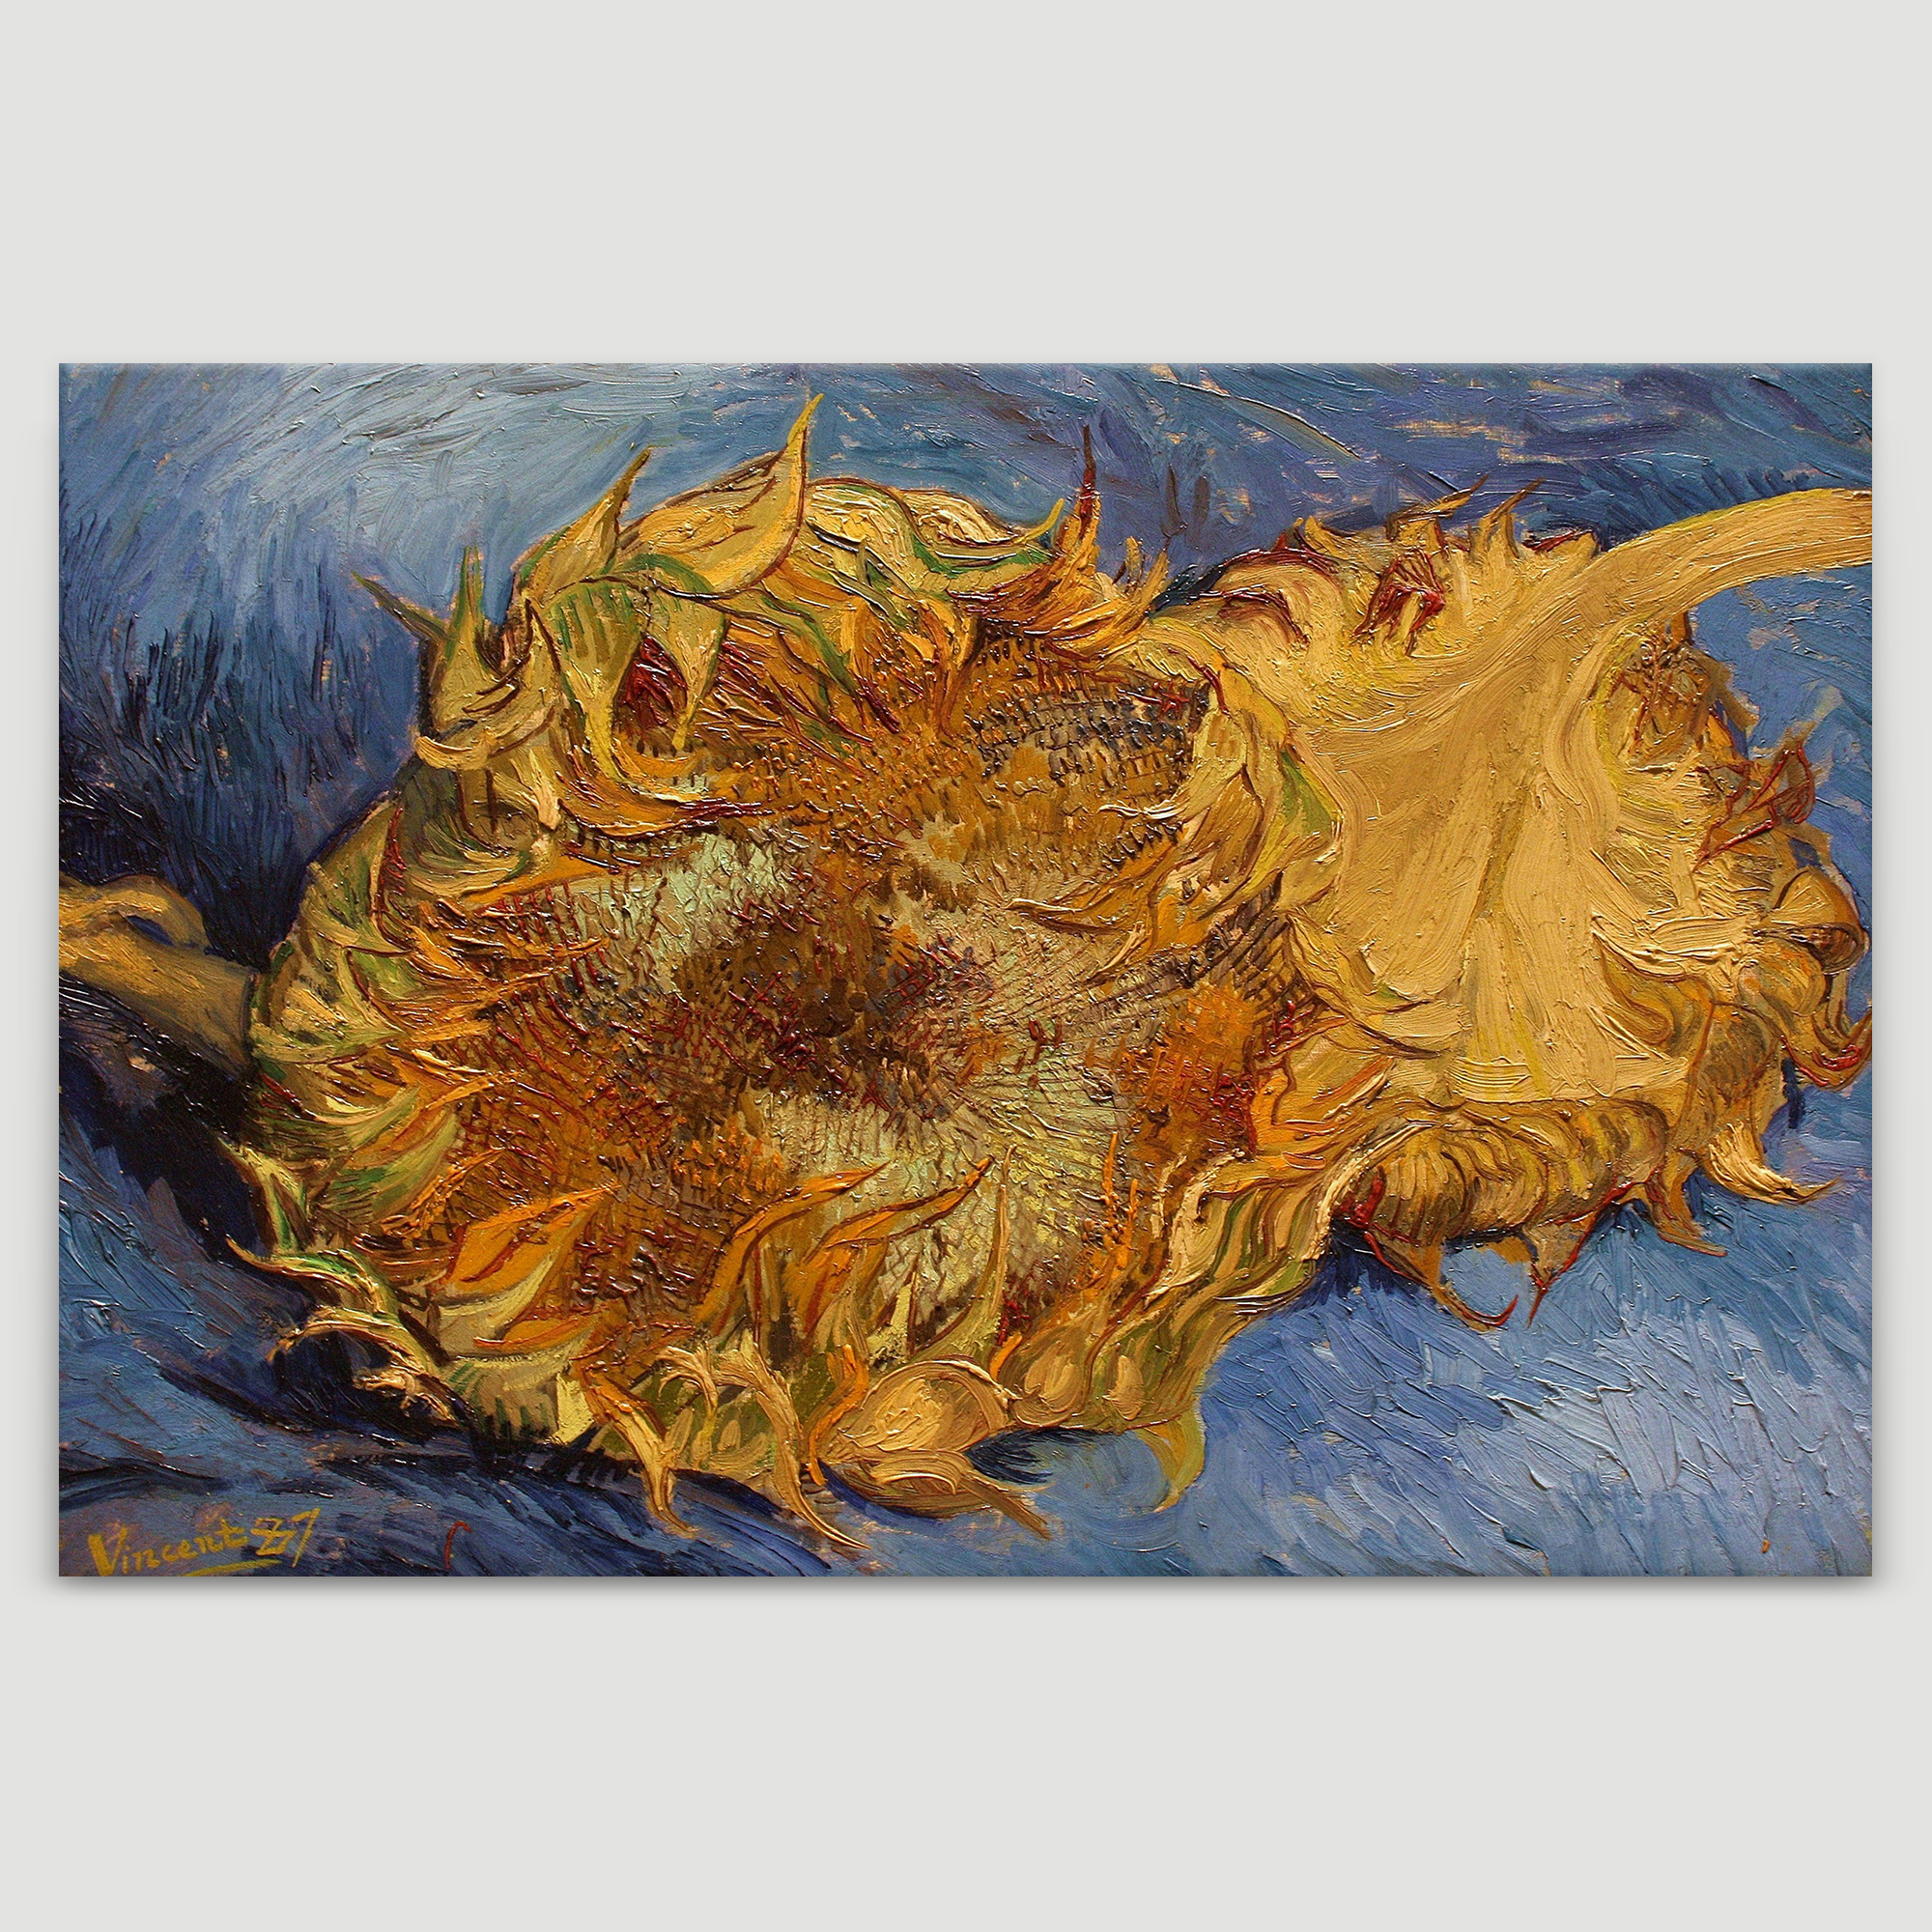 The Sunflowers by Vincent Van Gogh - Oil Painting Reproduction on Canvas Prints Wall Art, Ready to Hang - 32